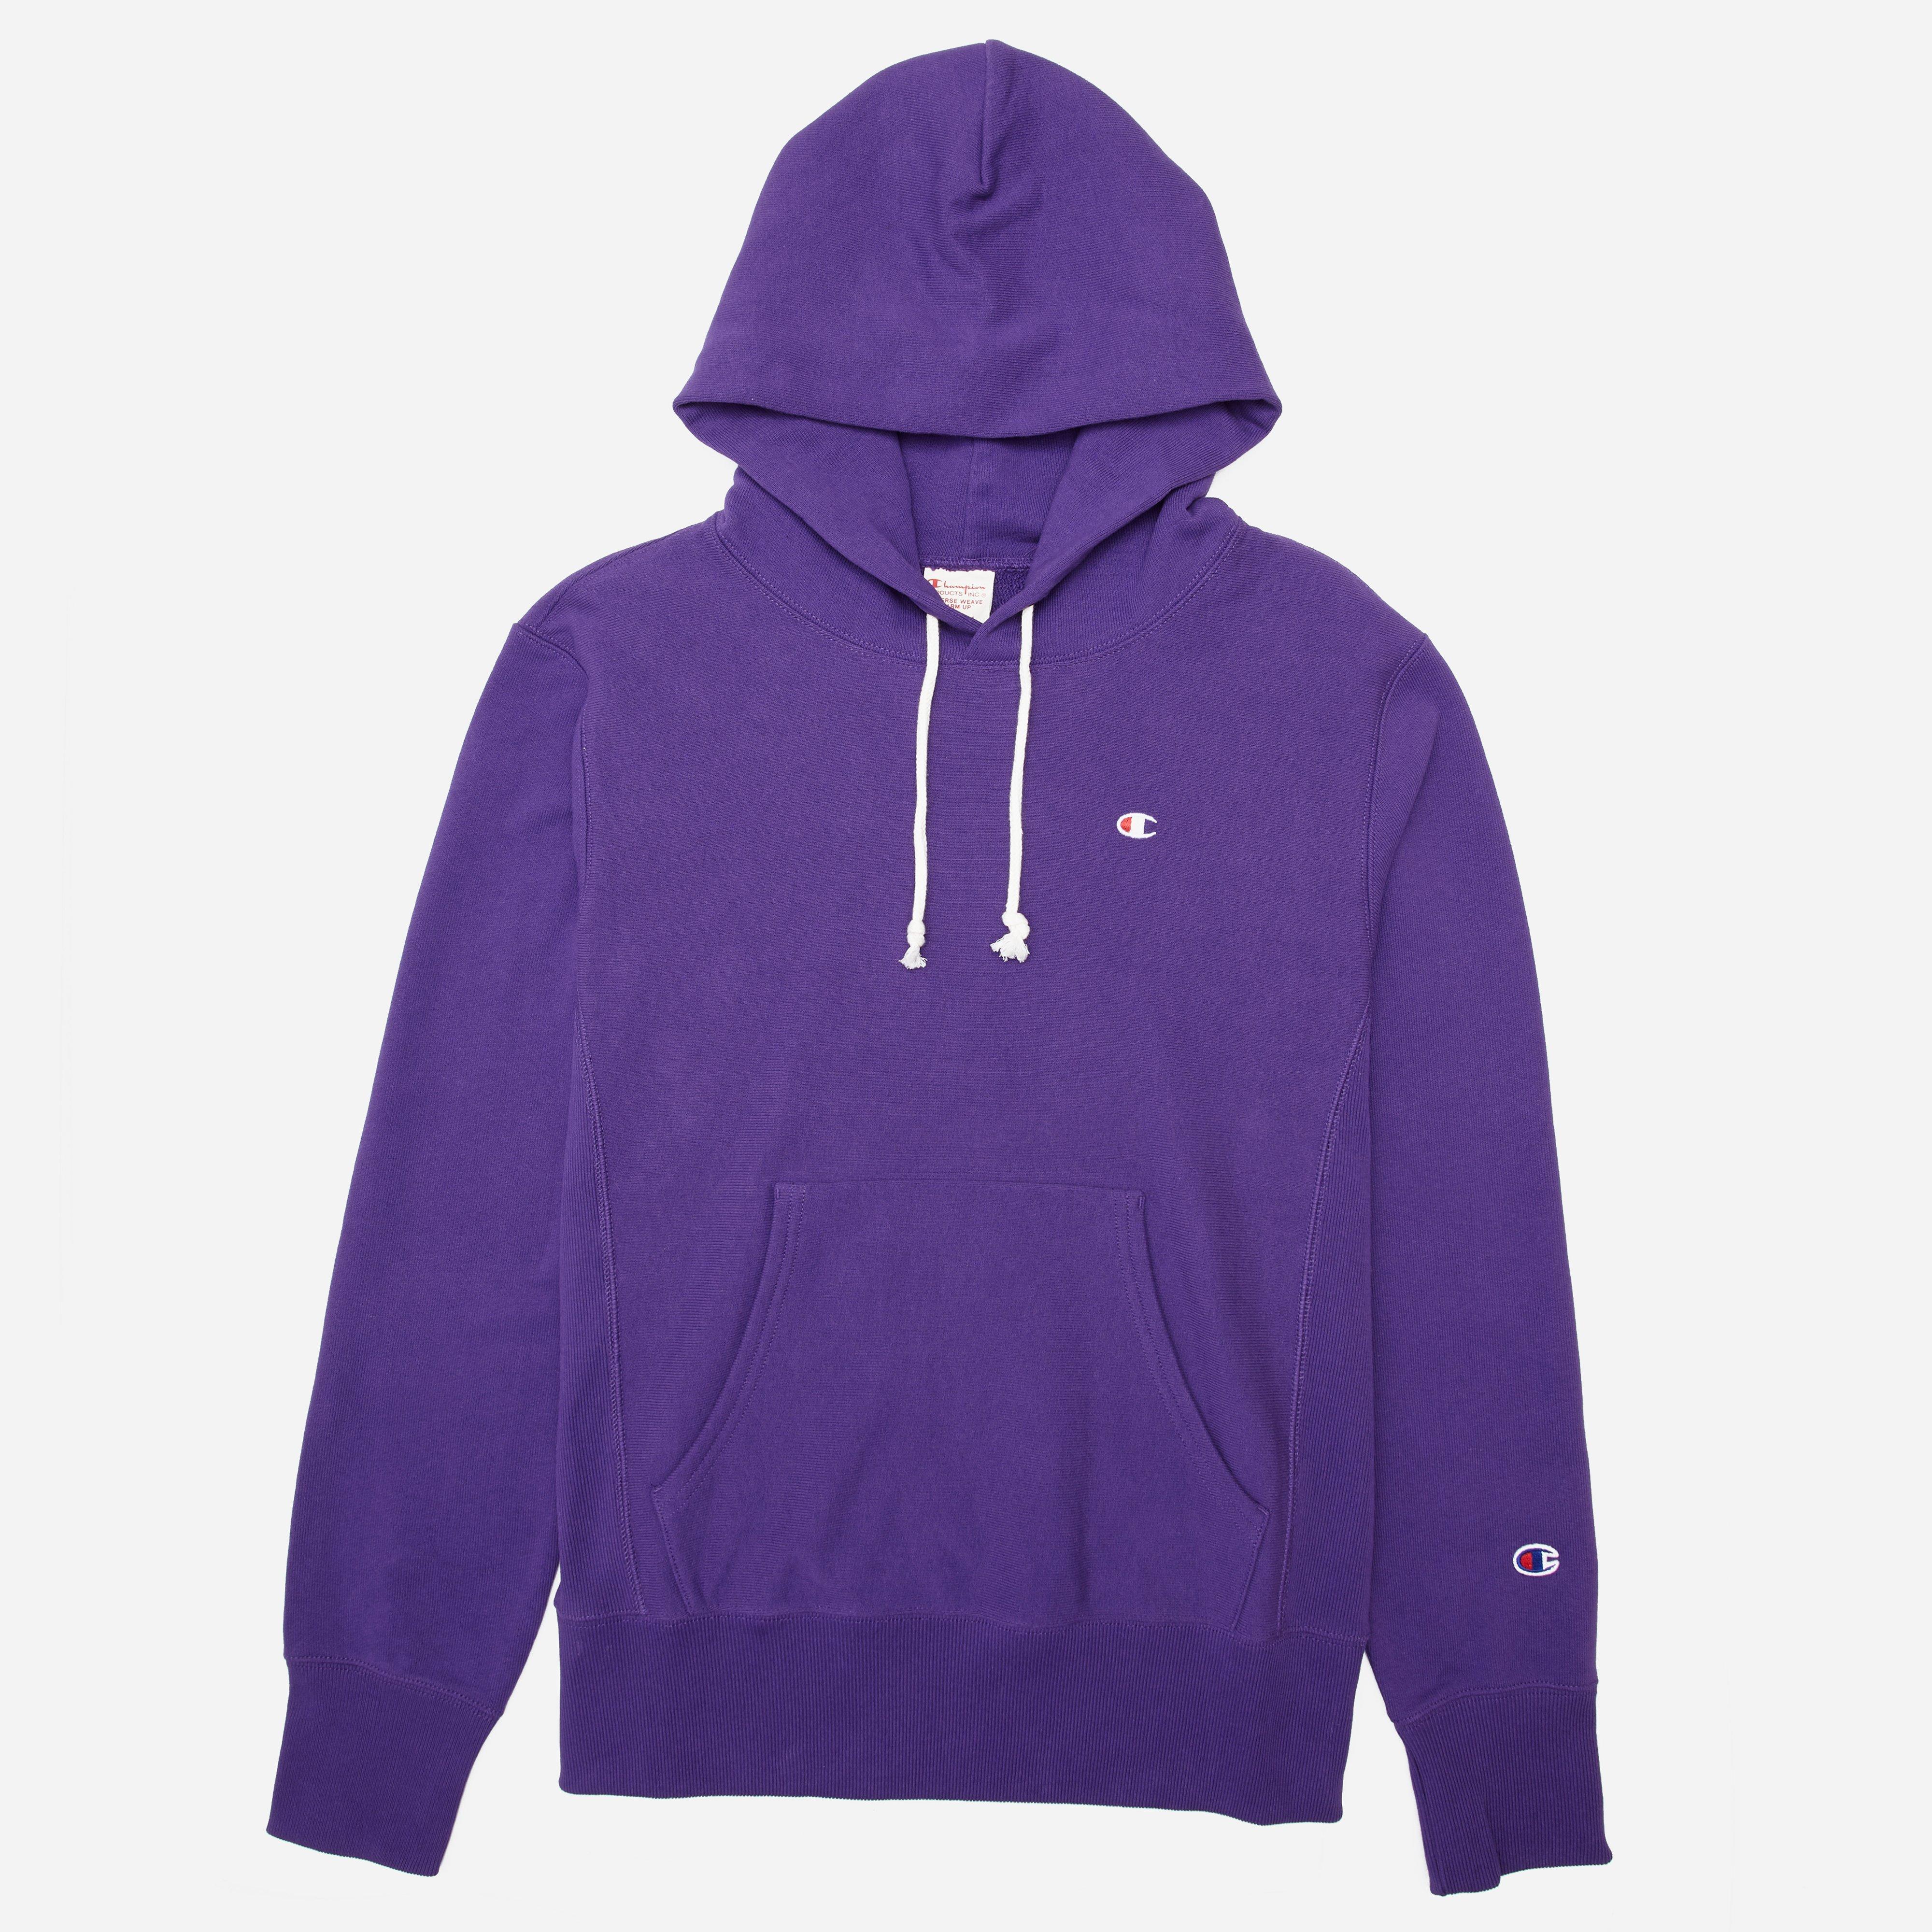 Champion Classic Hoodie in Purple for Men - Lyst